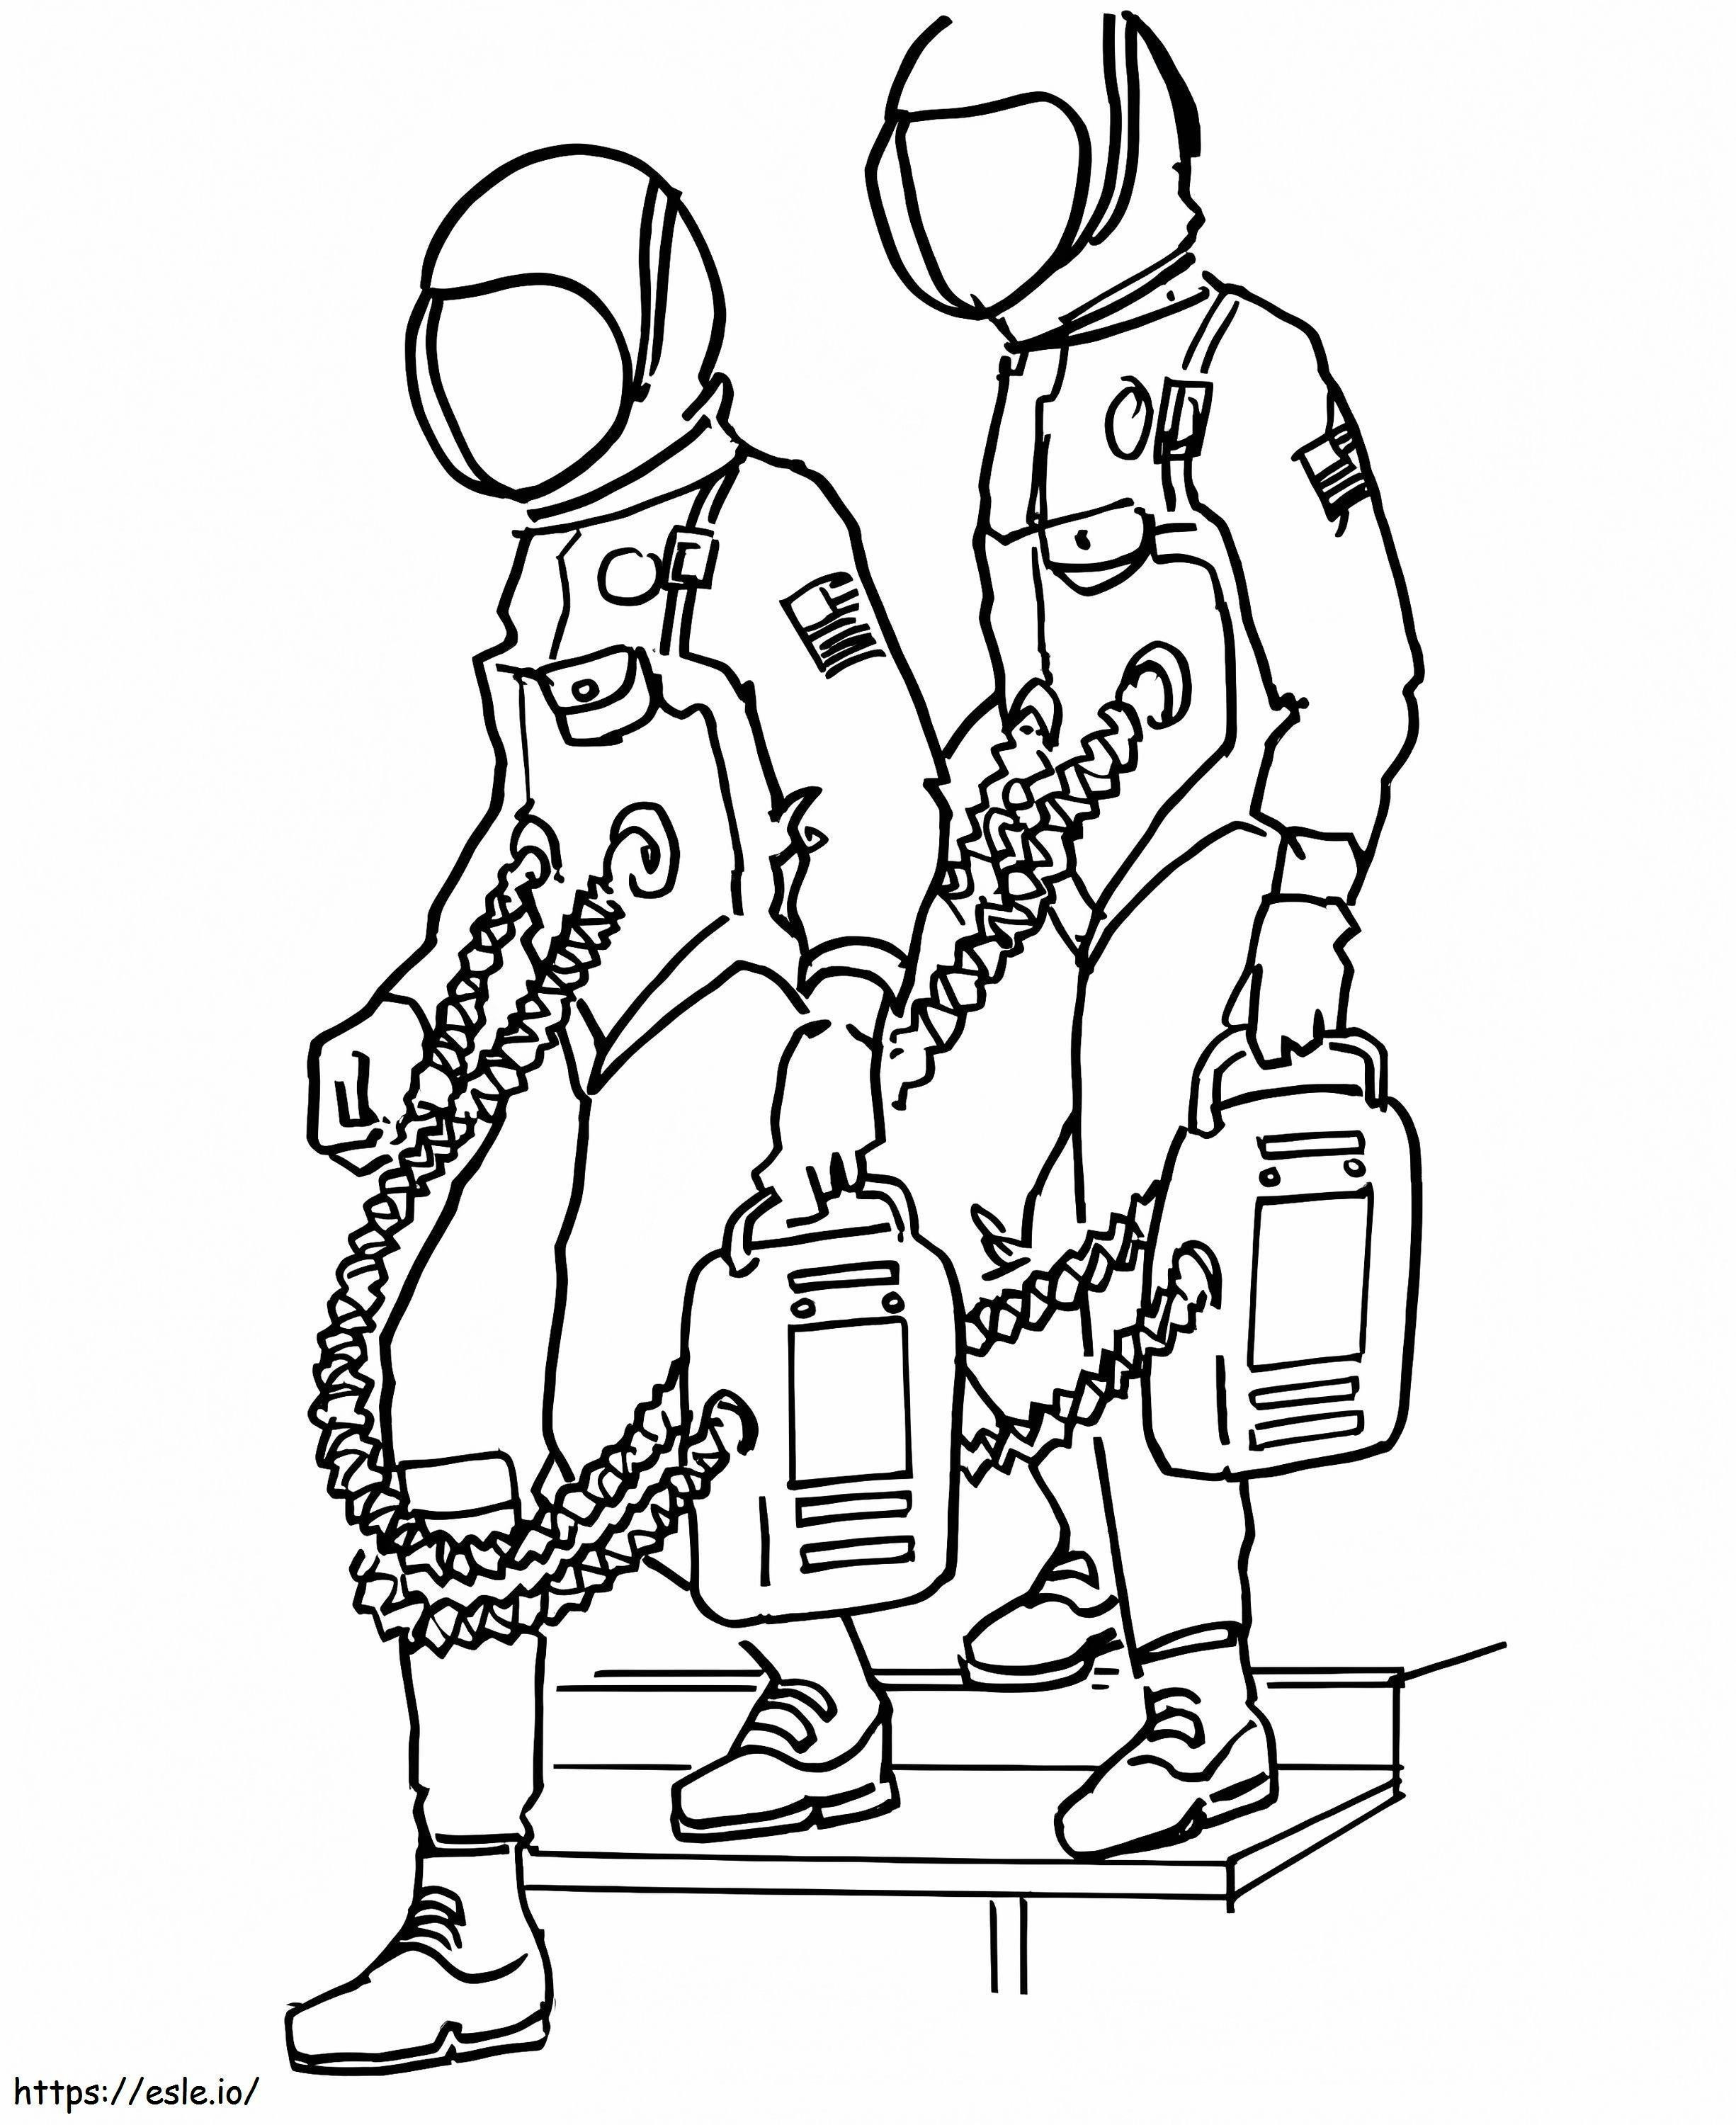 Of Astronauts coloring page